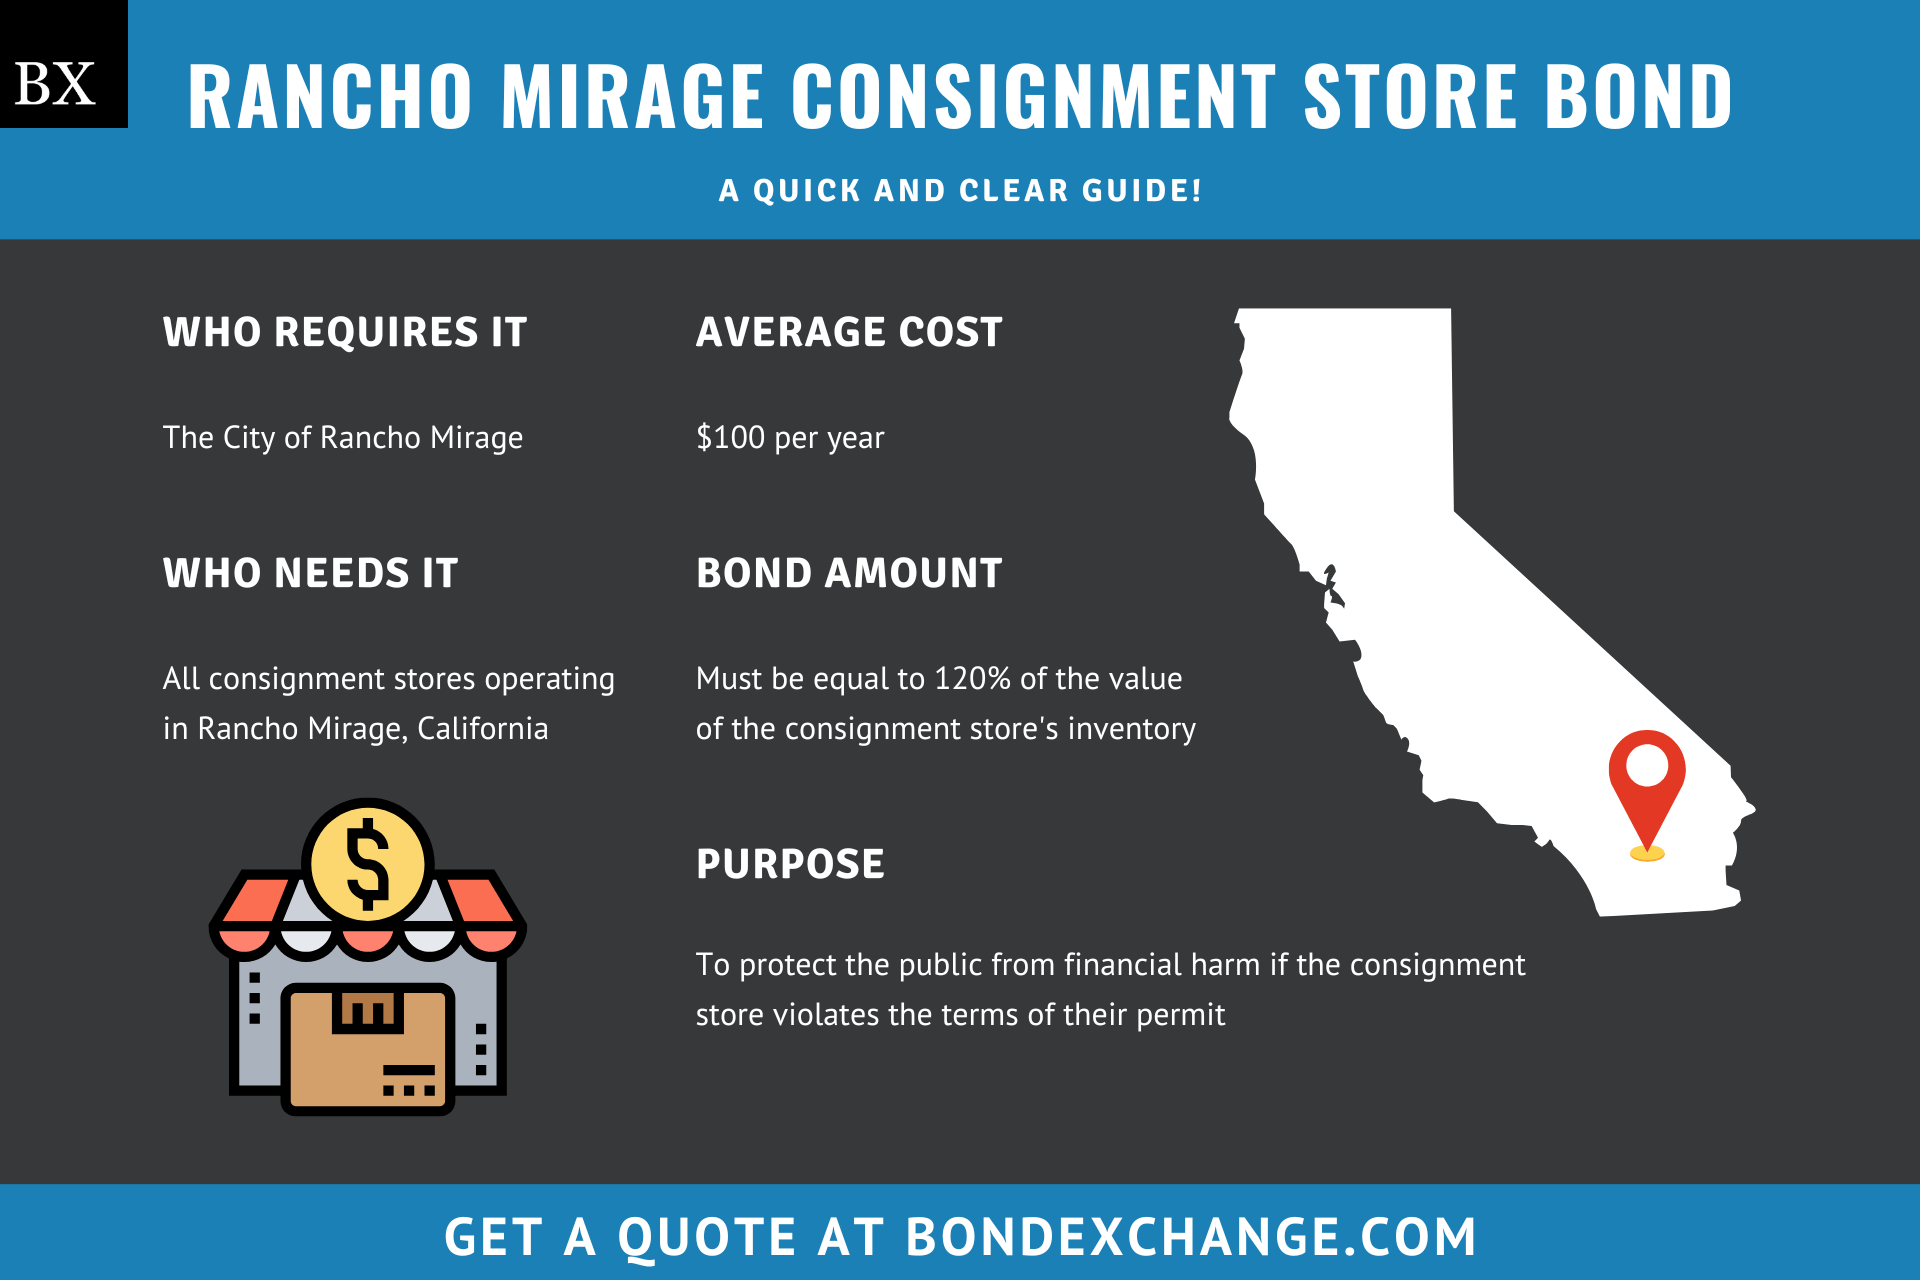 Rancho Mirage Consignment Store Bond